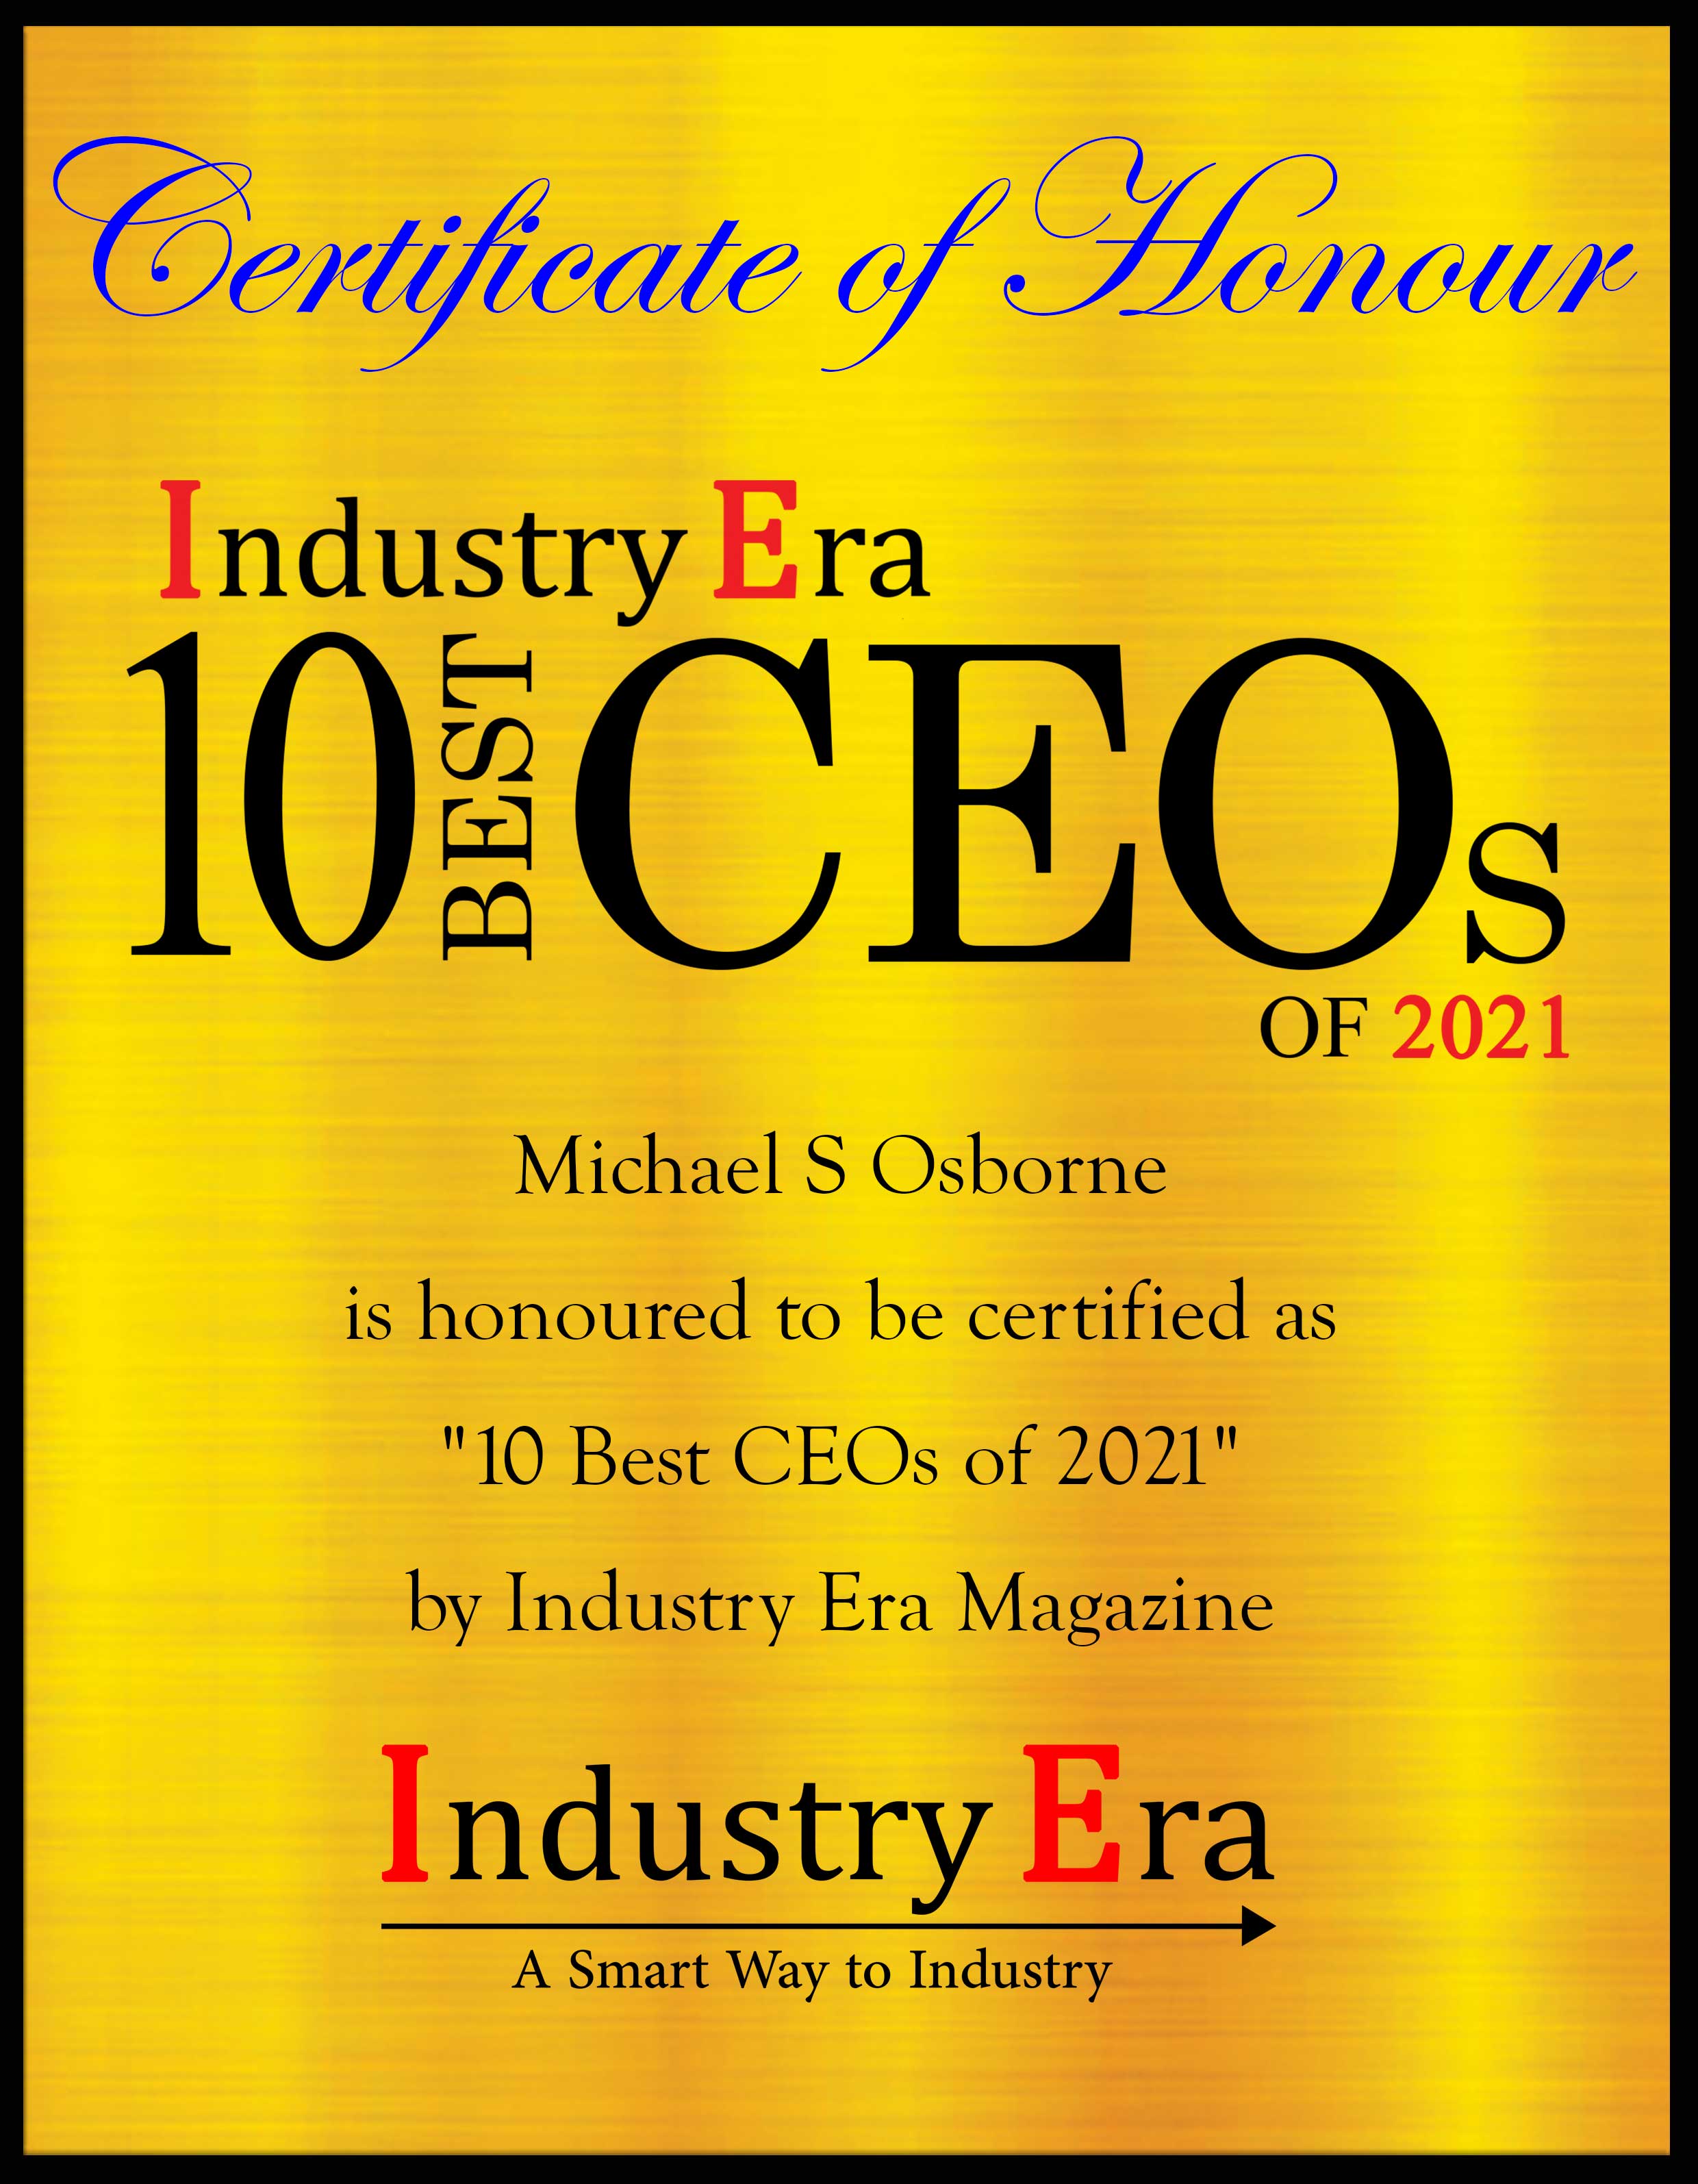 Michael S Osborne, President and CEO of Nukote Coating Systems Certificate